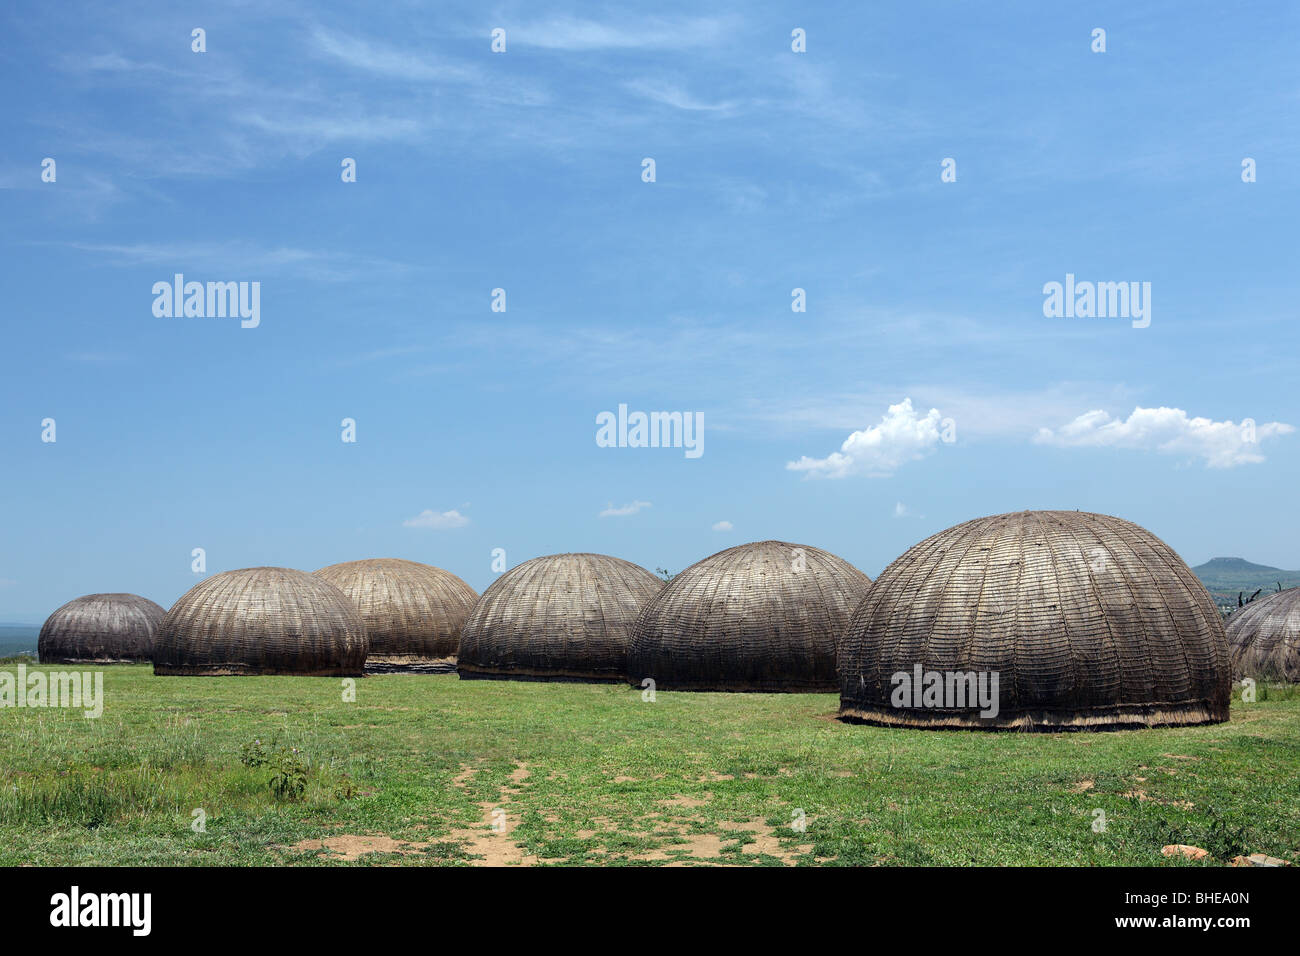 Traditional Zulu huts stand near the town of Ulundi in South Africa's Kwazulu Natal province Stock Photo